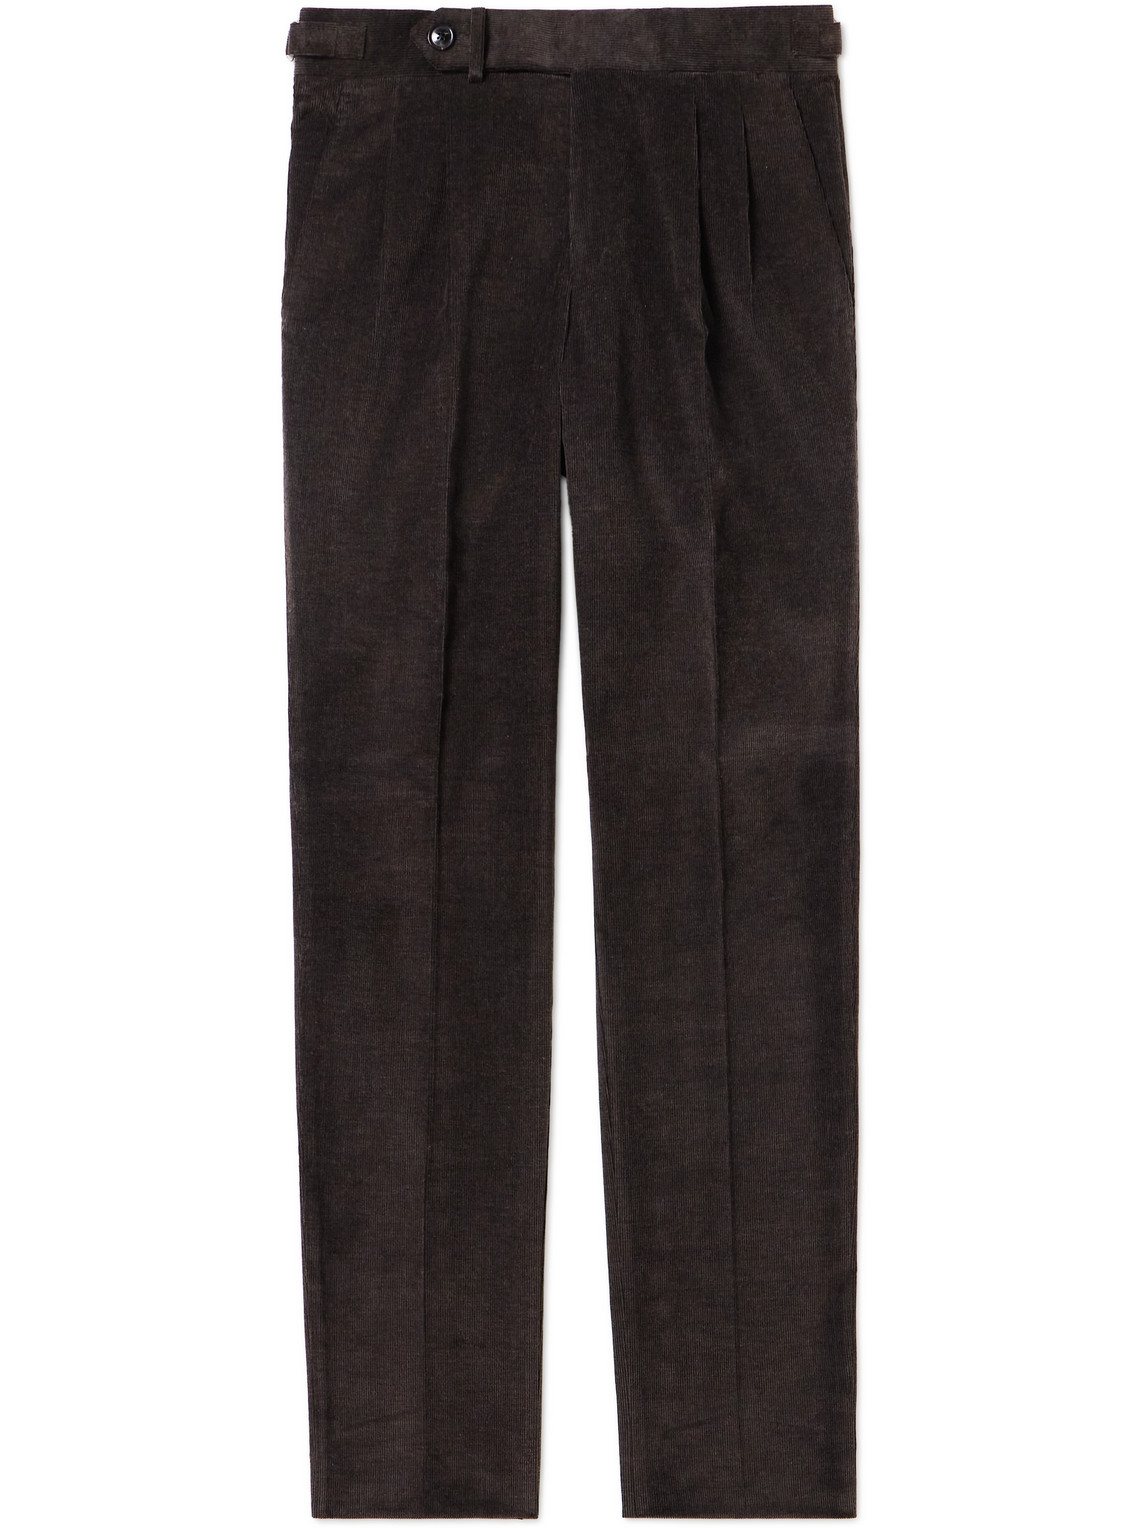 Tapered Pleated Cotton-Corduroy Trousers